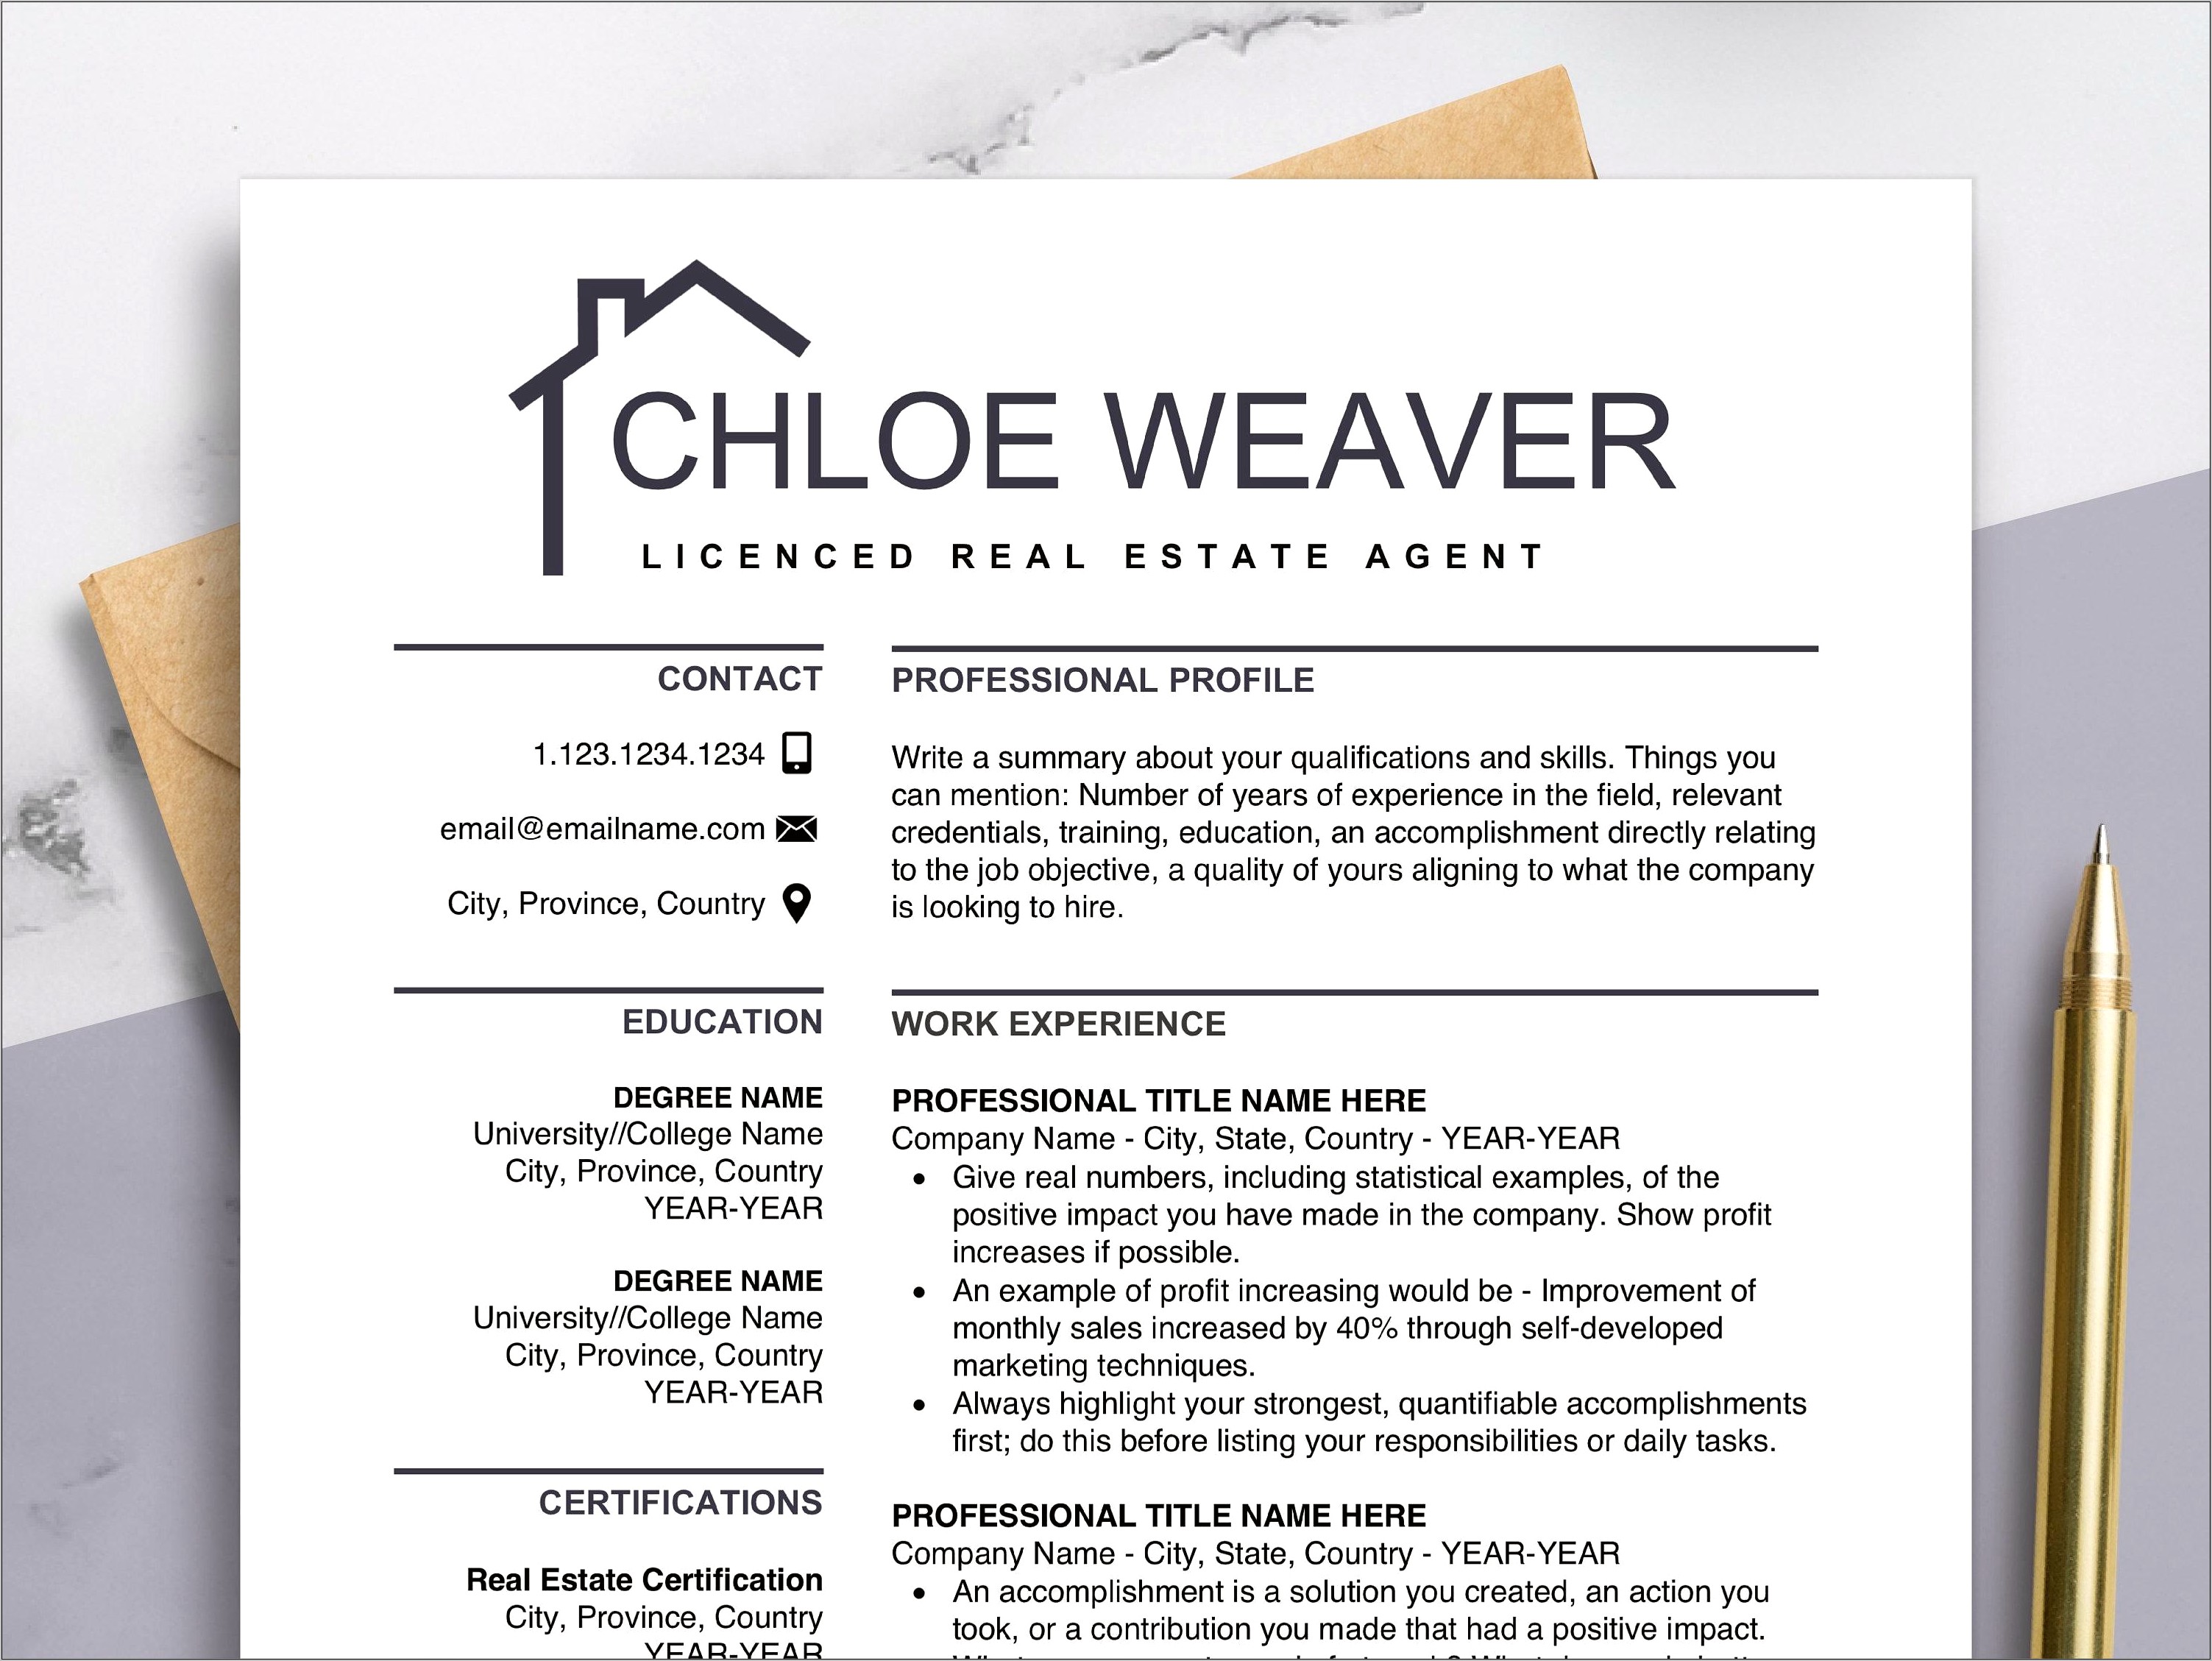 Resume Template For A Real Estate Broker